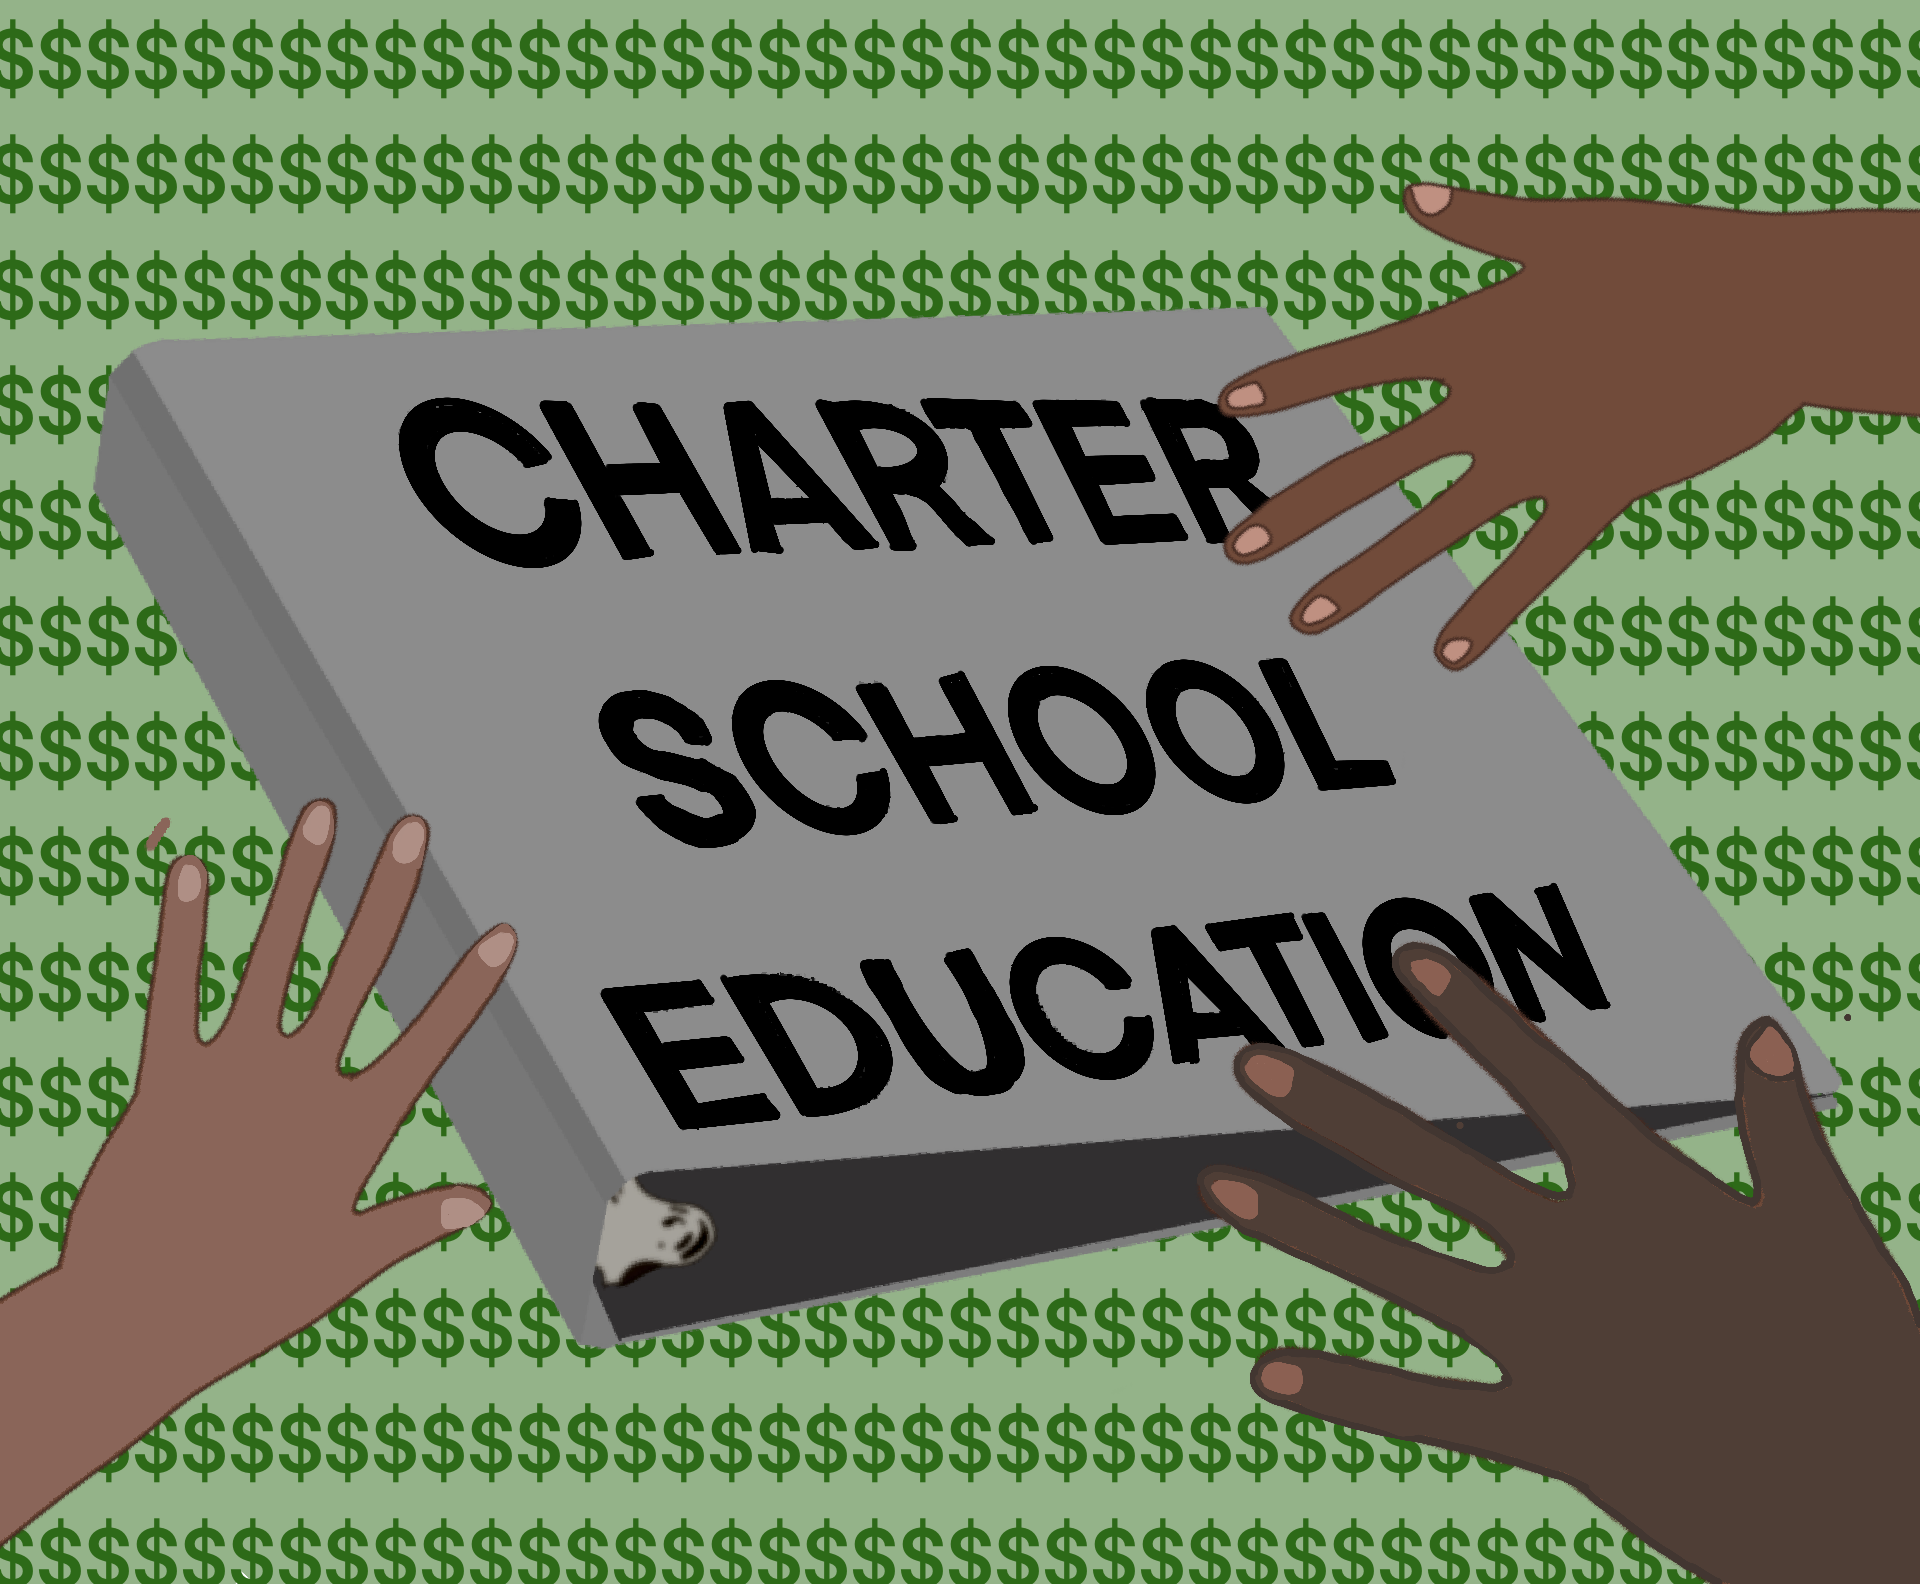 As problems of socioeconomic diversity continue to arise in APS, the removal of public funds from the pockets of charter schools is a step in the right direction.